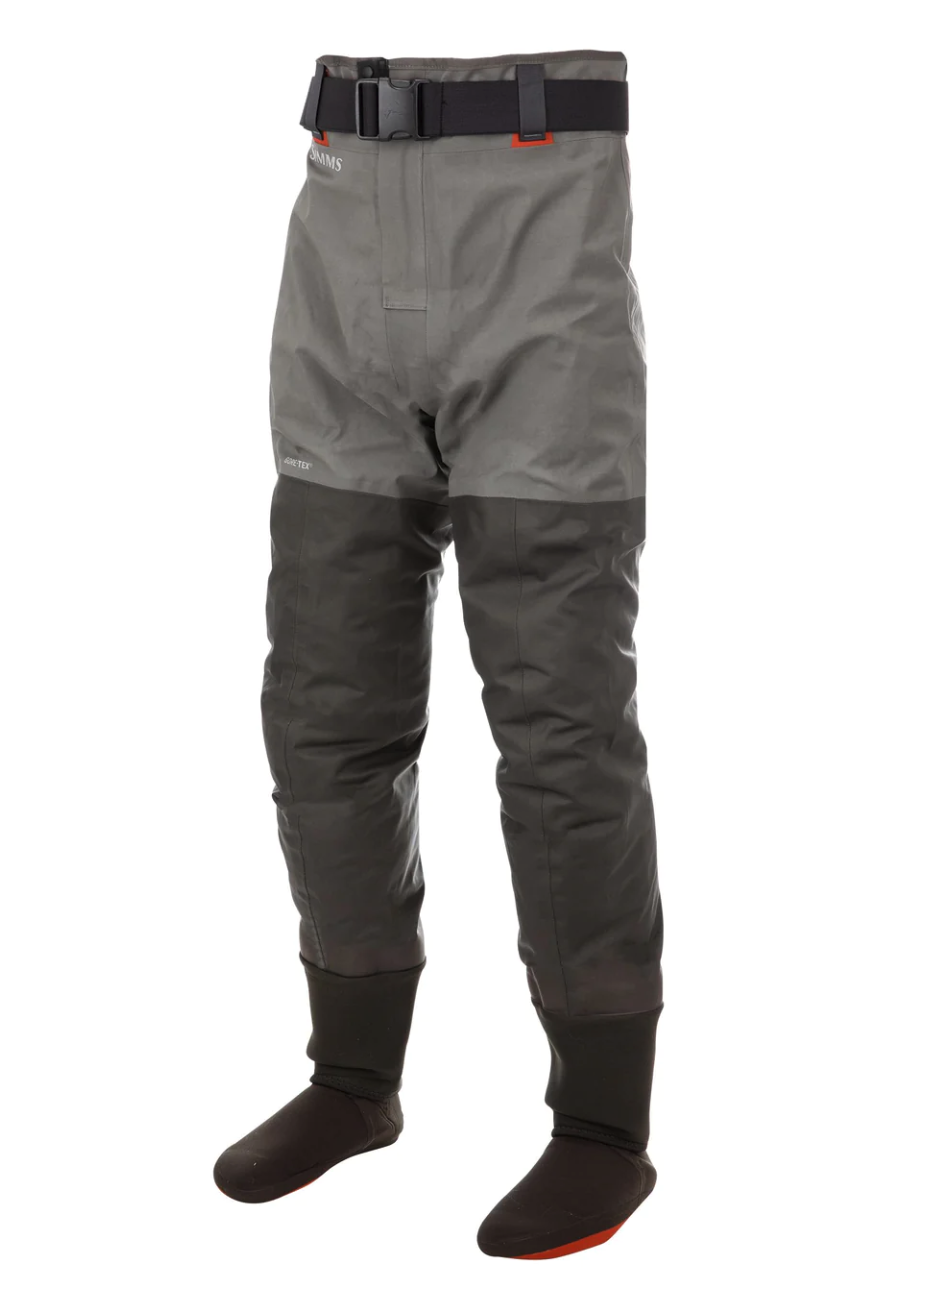 Shop Simms G3 Guide Wading Pant online with free shipping.